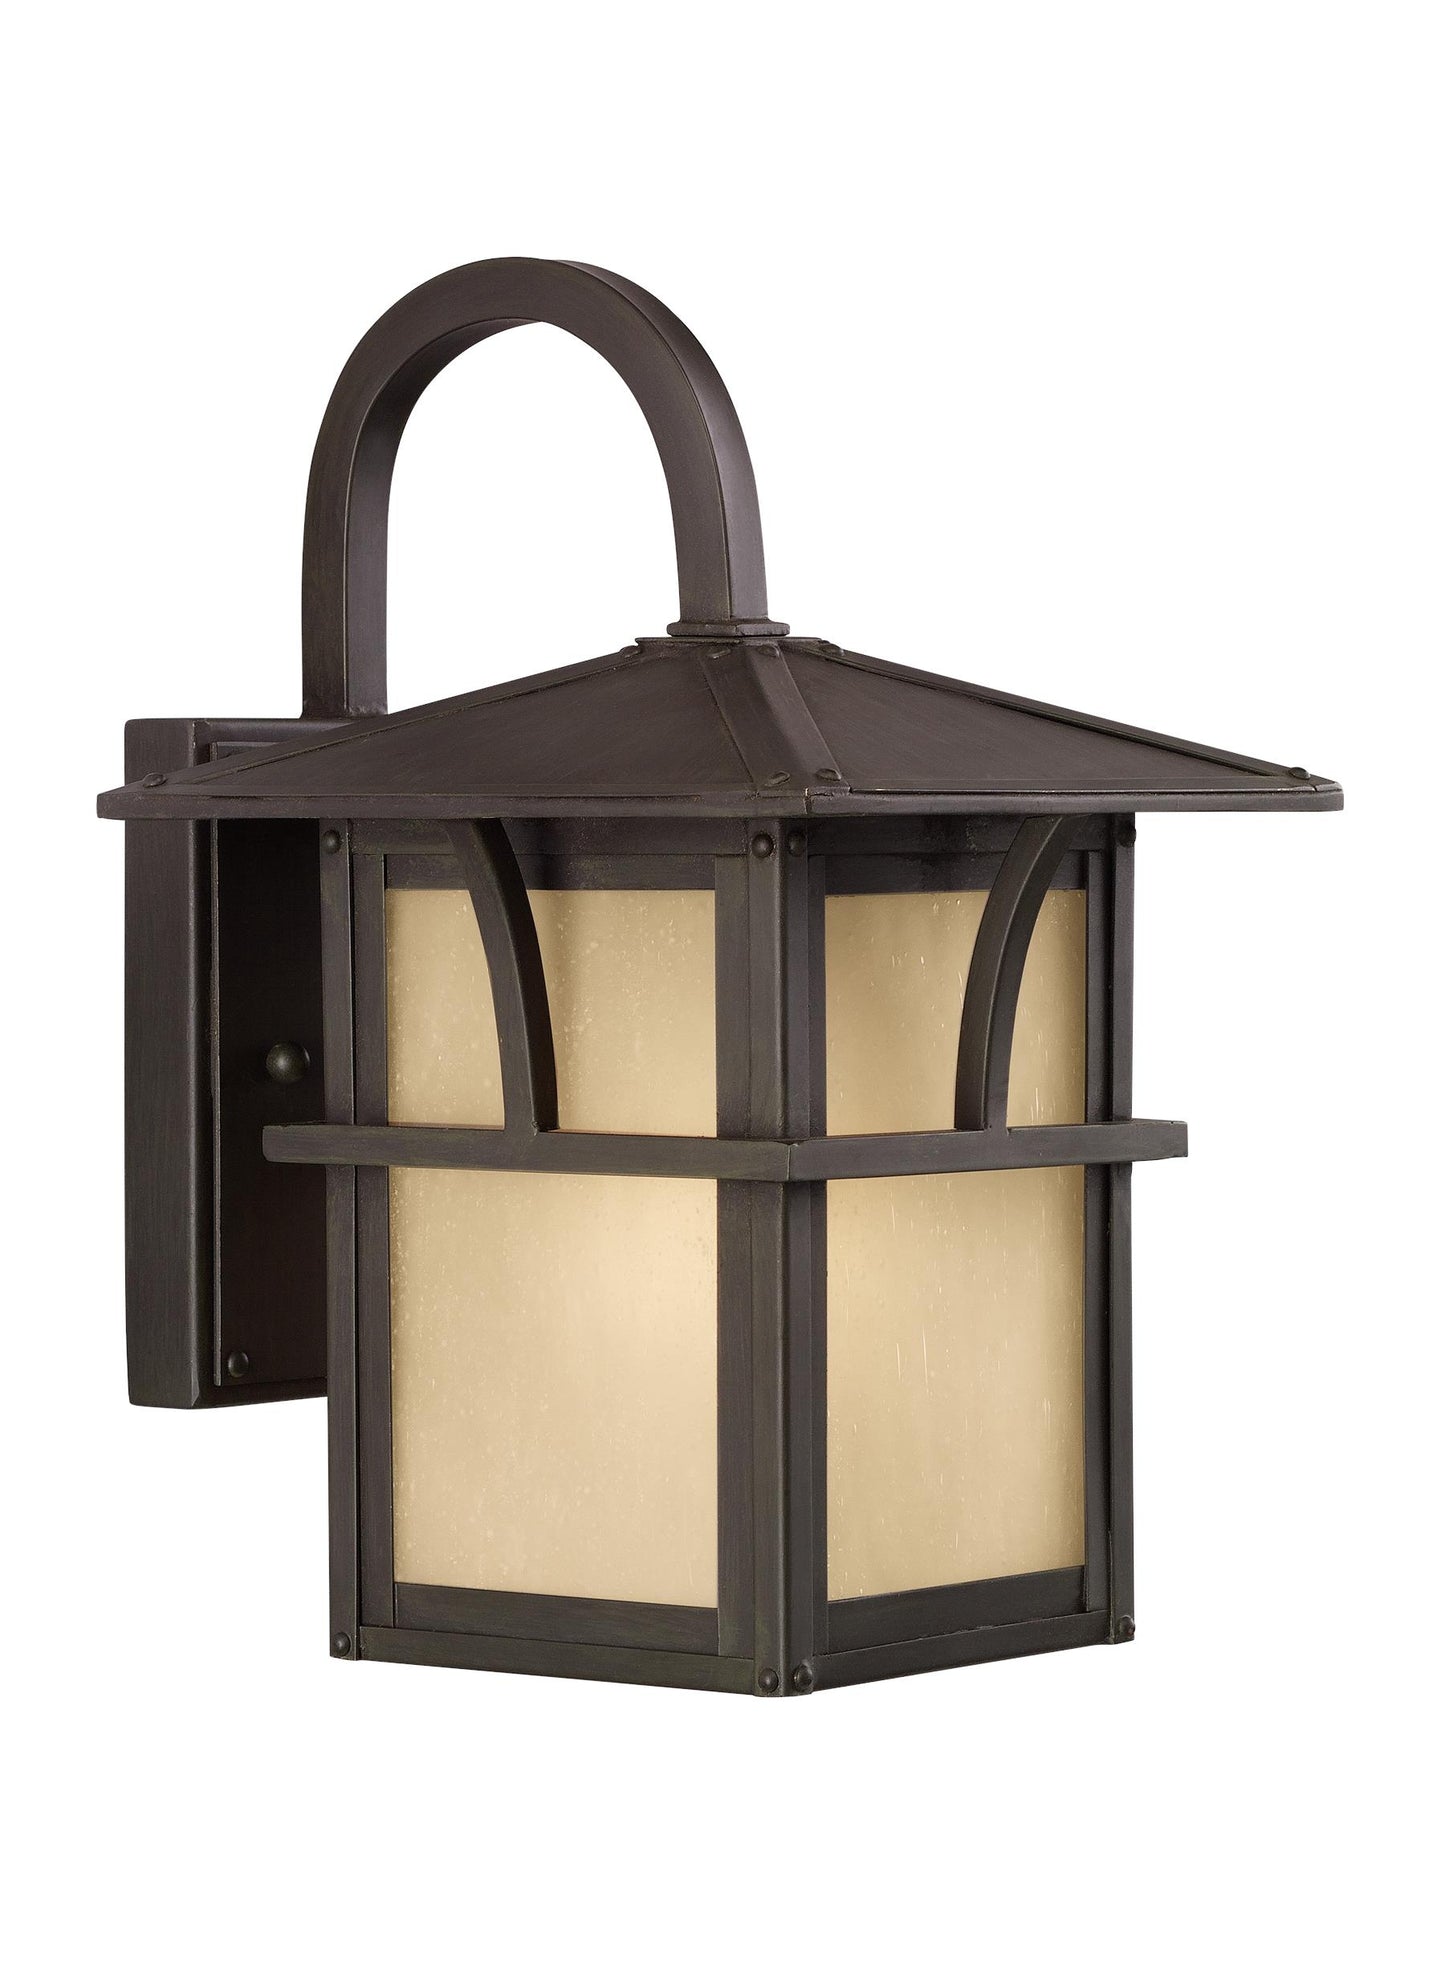 Medford Lakes transitional 1-light outdoor exterior small wall lantern sconce in statuary bronze finish with etched hammer...